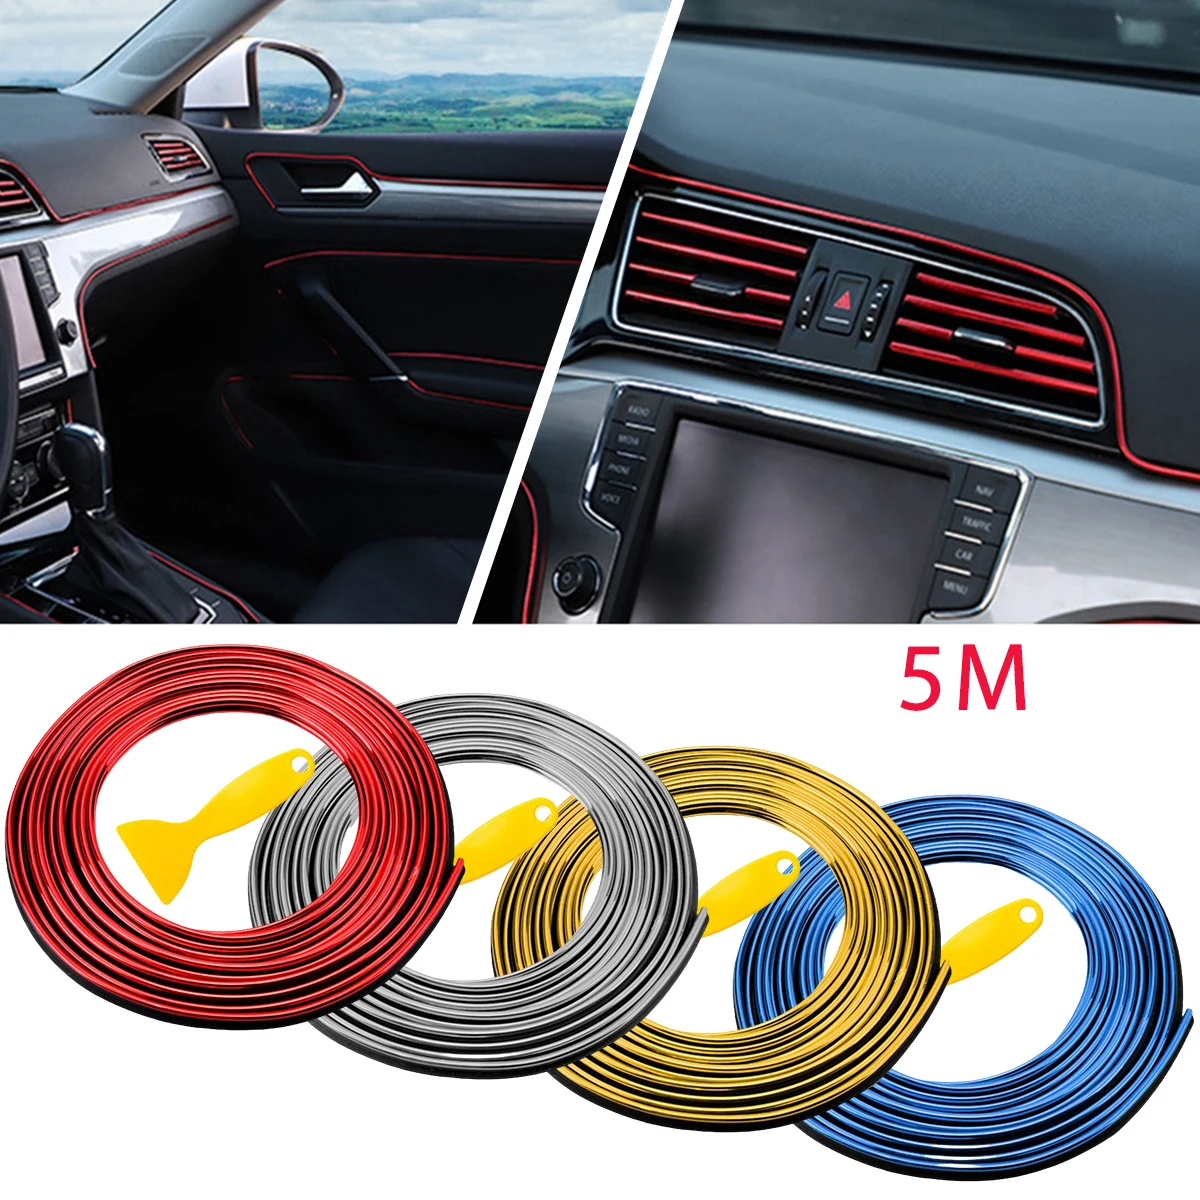 

Universal Car Moulding Decoration Flexible Strips 5M Interior Auto Mouldings Car Cover Trim Dashboard Door Car-styling